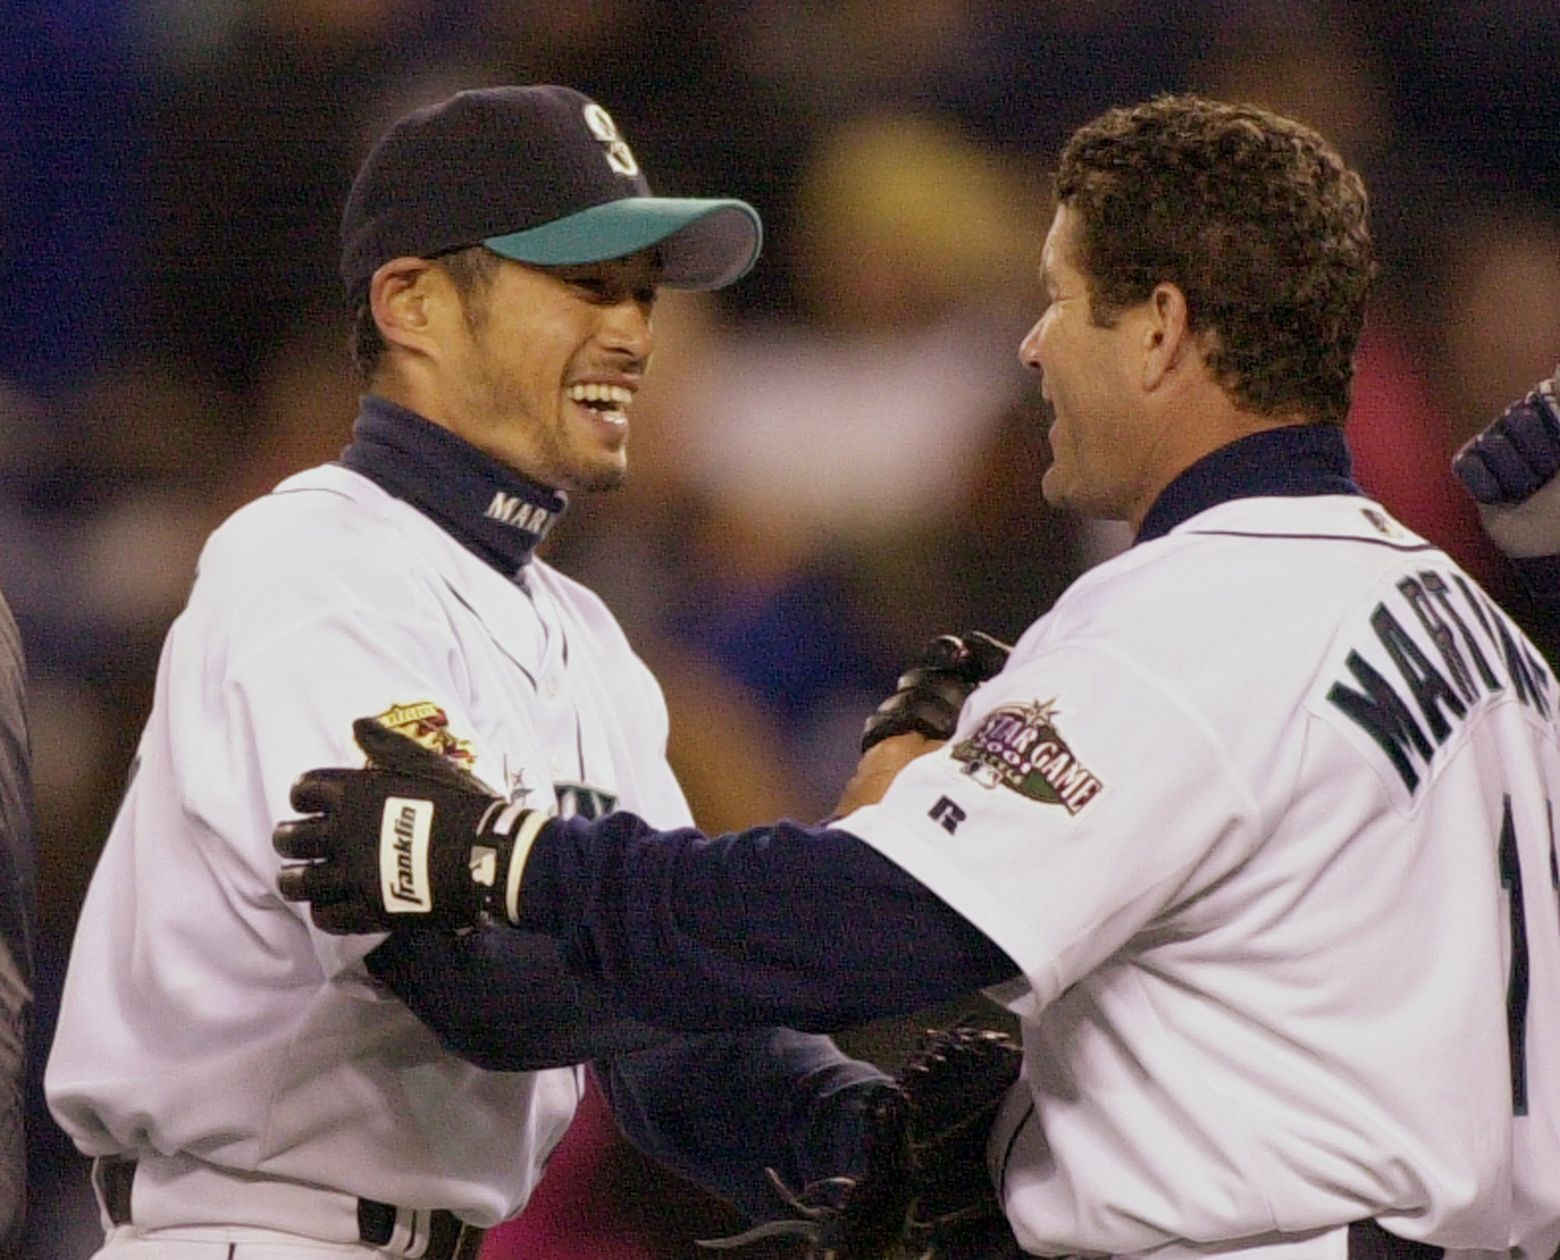 Nostalgic opening to 2018: Ichiro will be in outfield again for the Mariners  - The Columbian